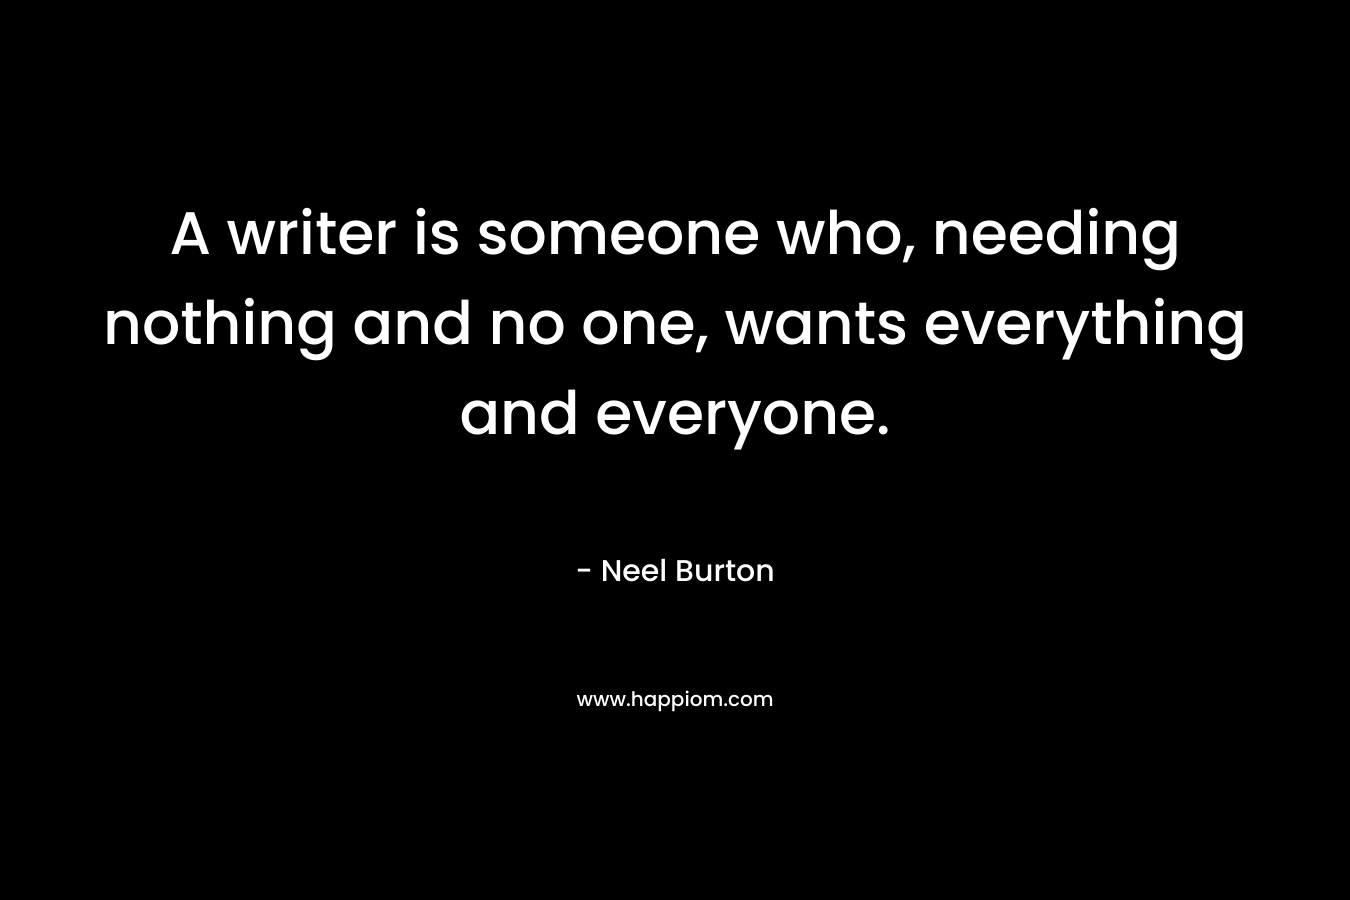 A writer is someone who, needing nothing and no one, wants everything and everyone.